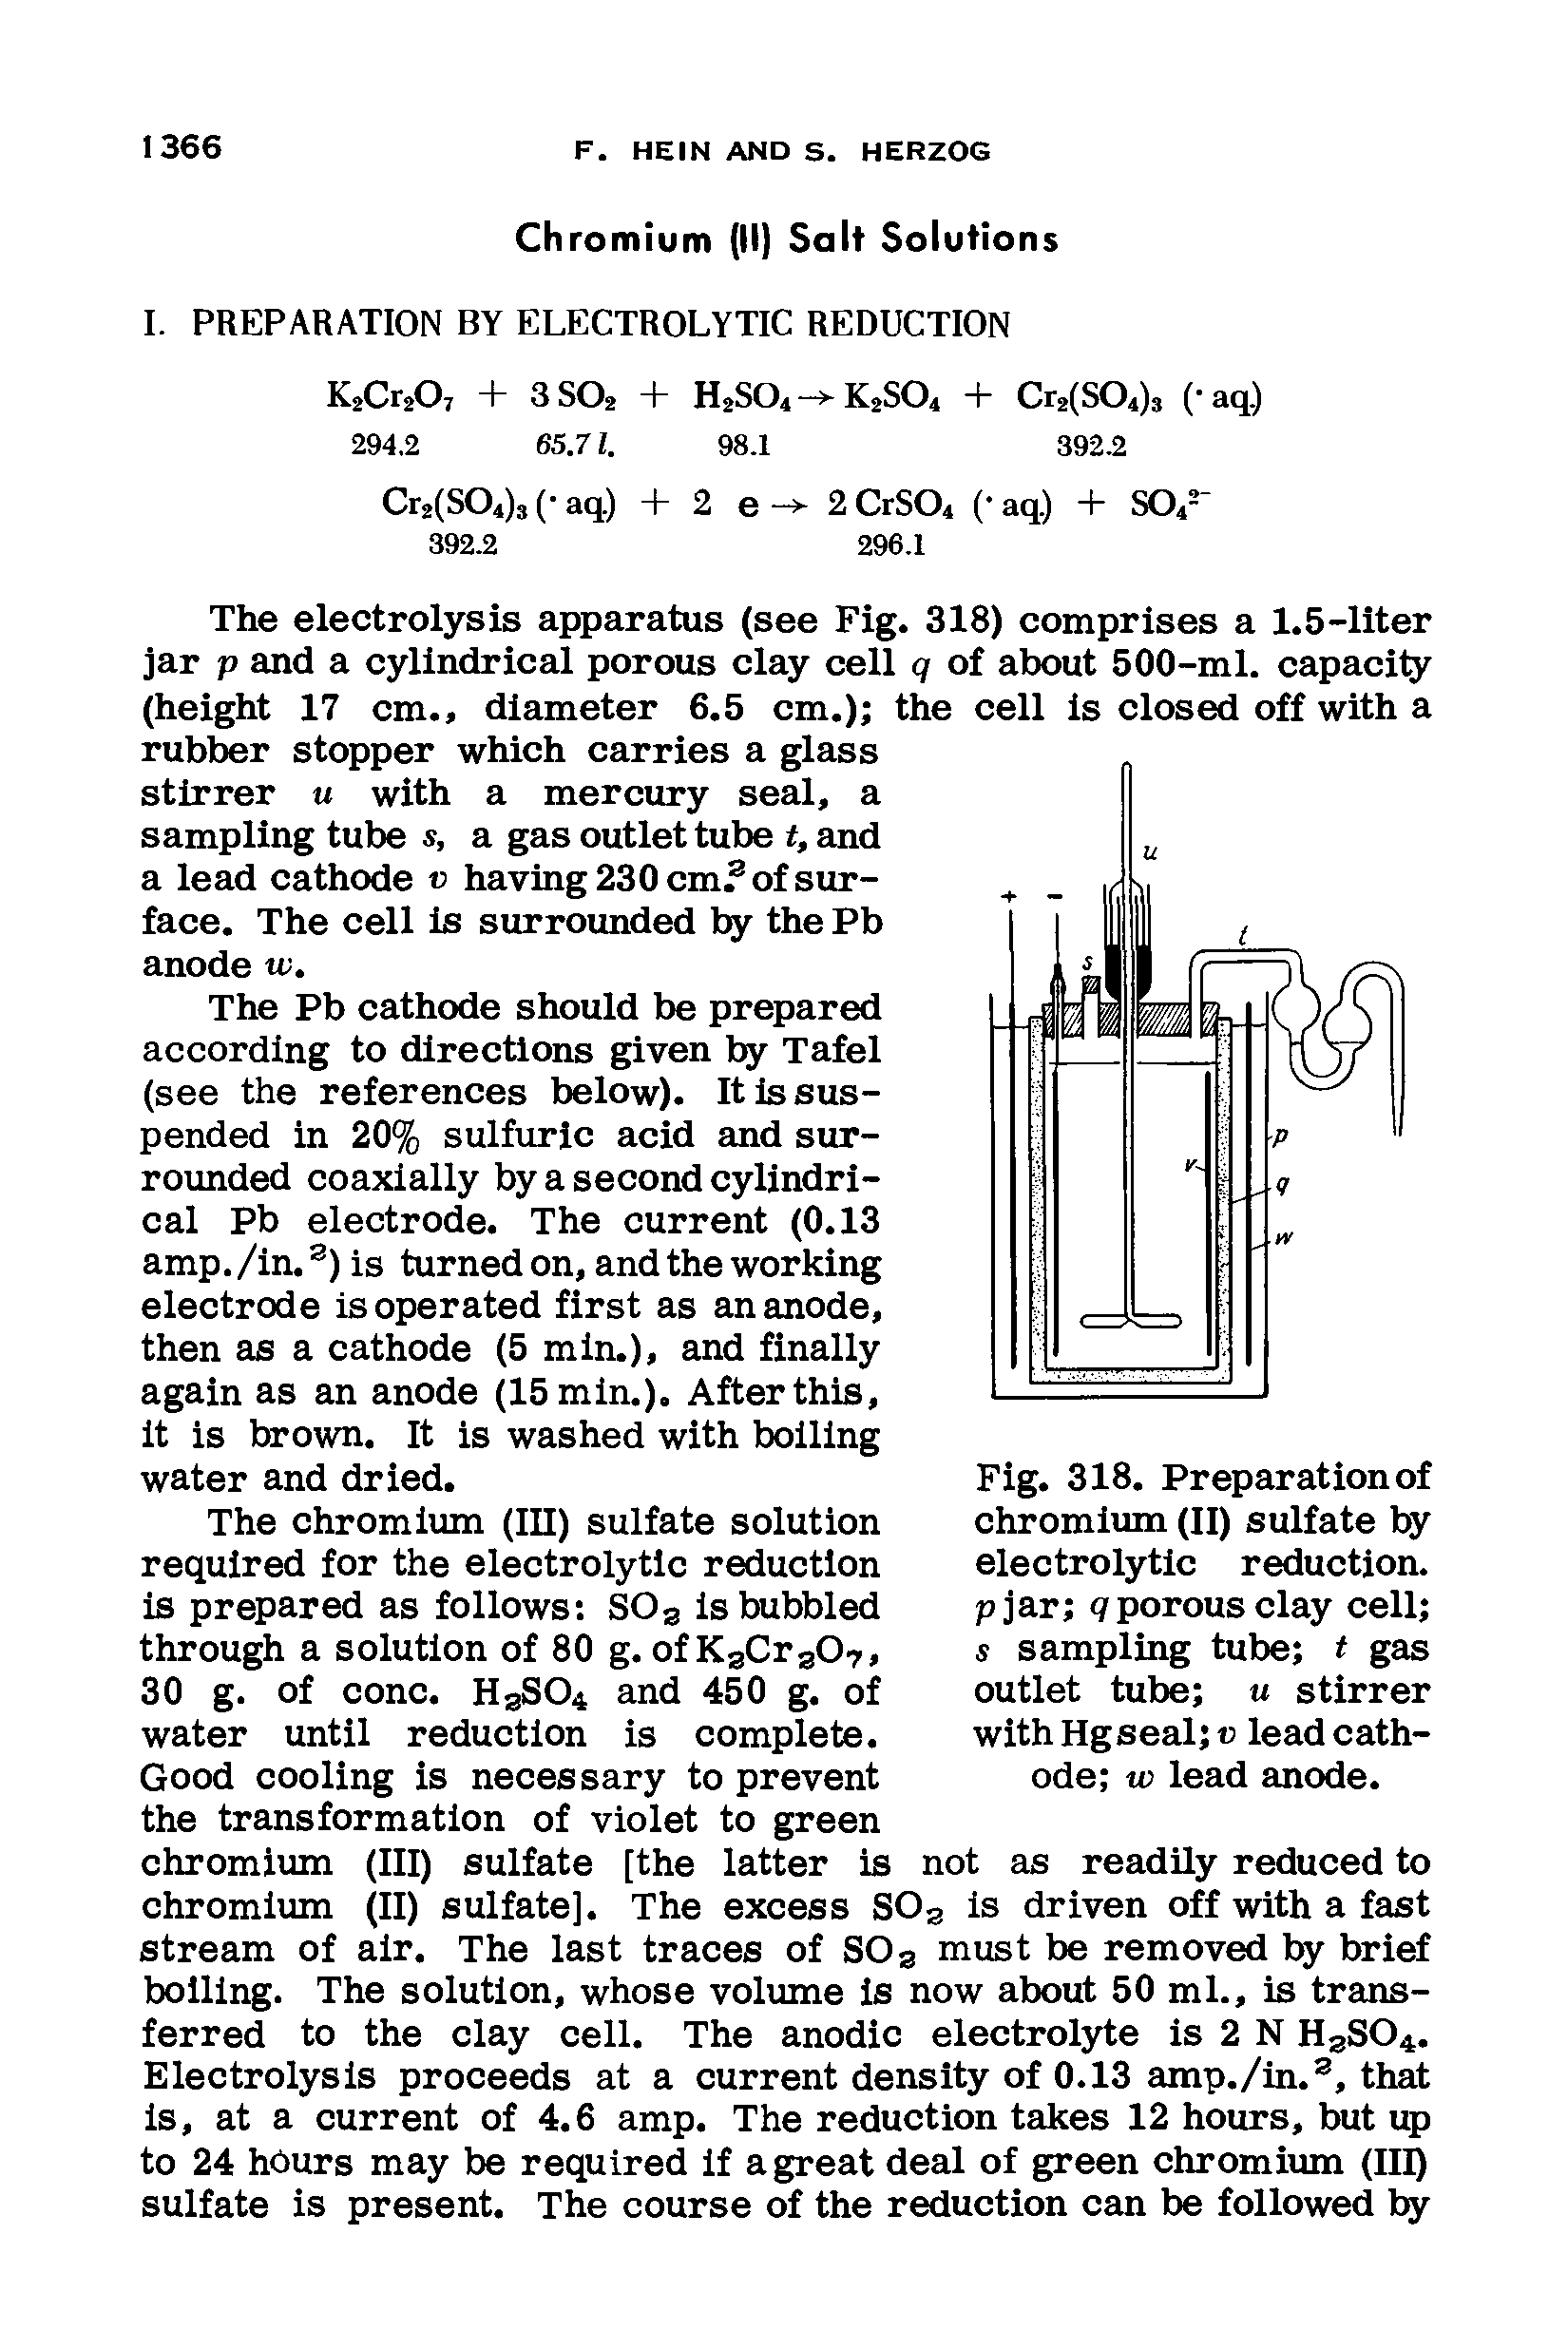 Fig. 318. Preparation of chromium (II) sulfate by electrolytic reduction, pjar q porous clay cell s sampling tube t gas outlet tube u stirrer with Hgseal w lead cathode w lead anode.